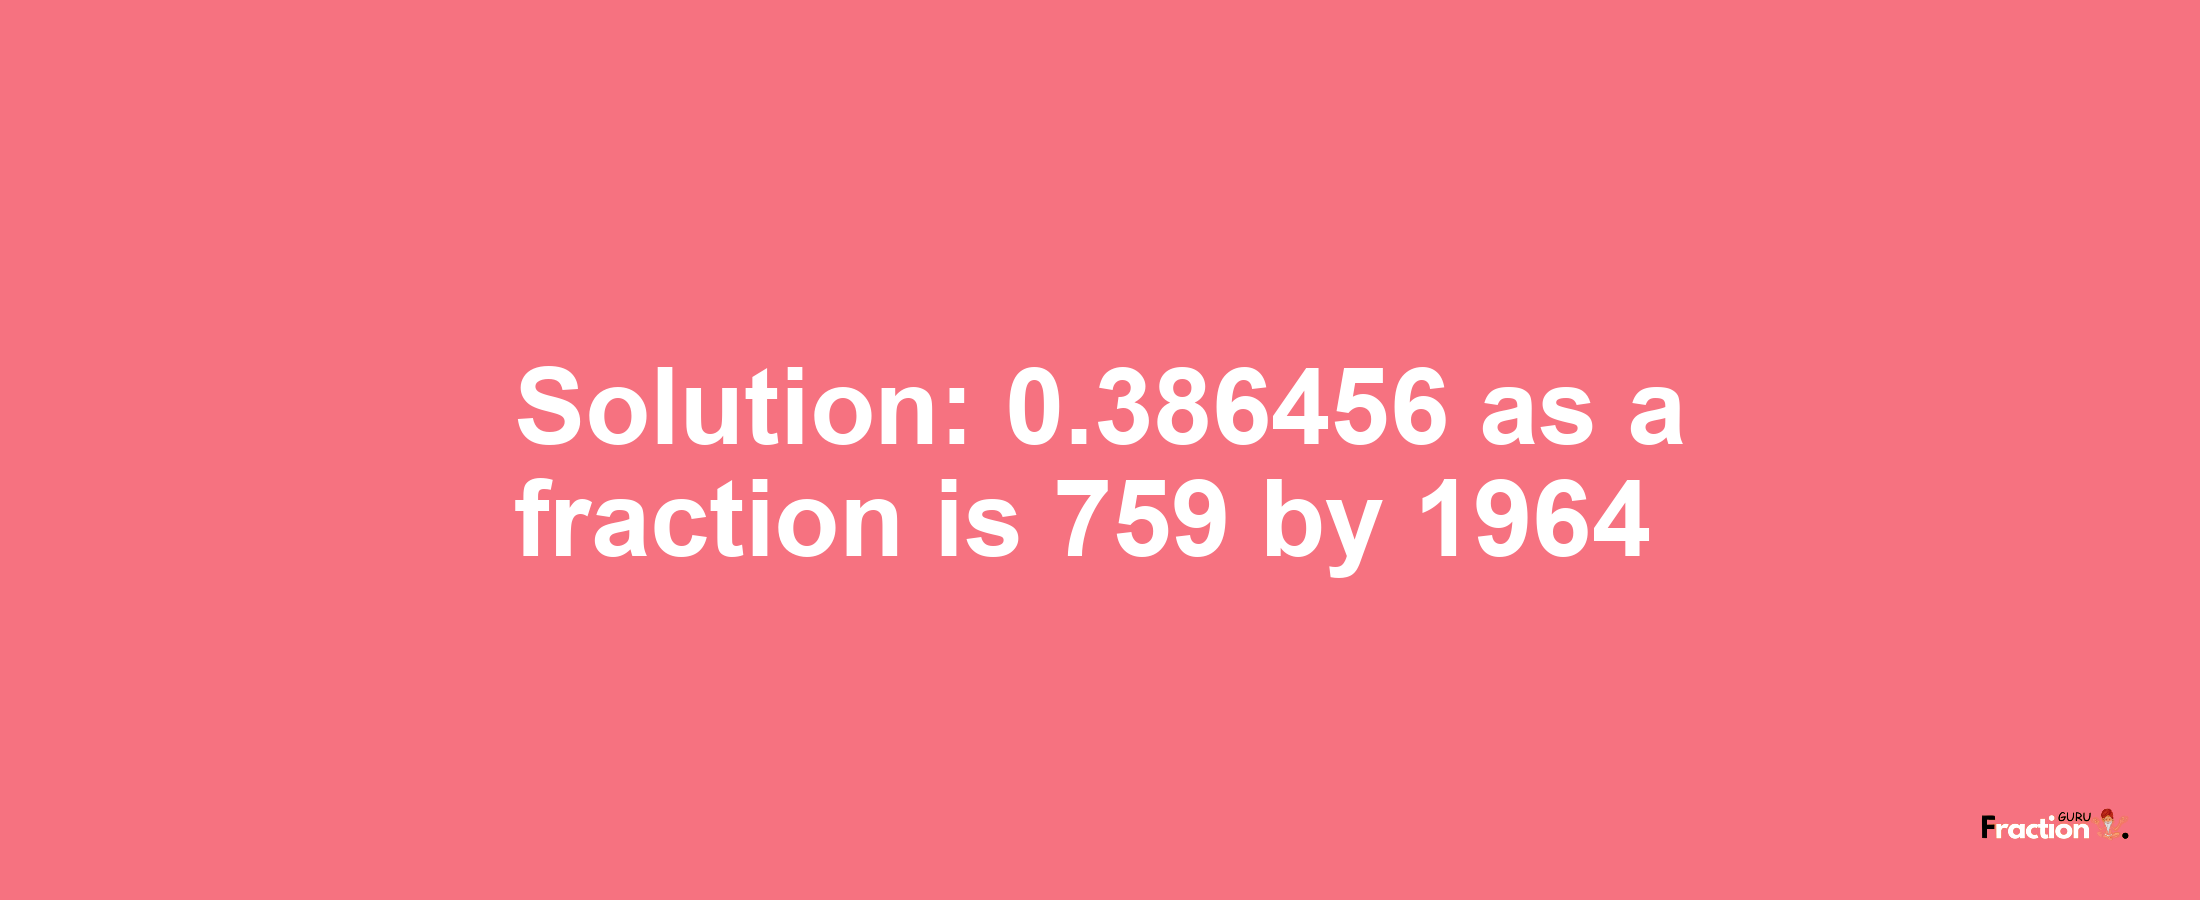 Solution:0.386456 as a fraction is 759/1964